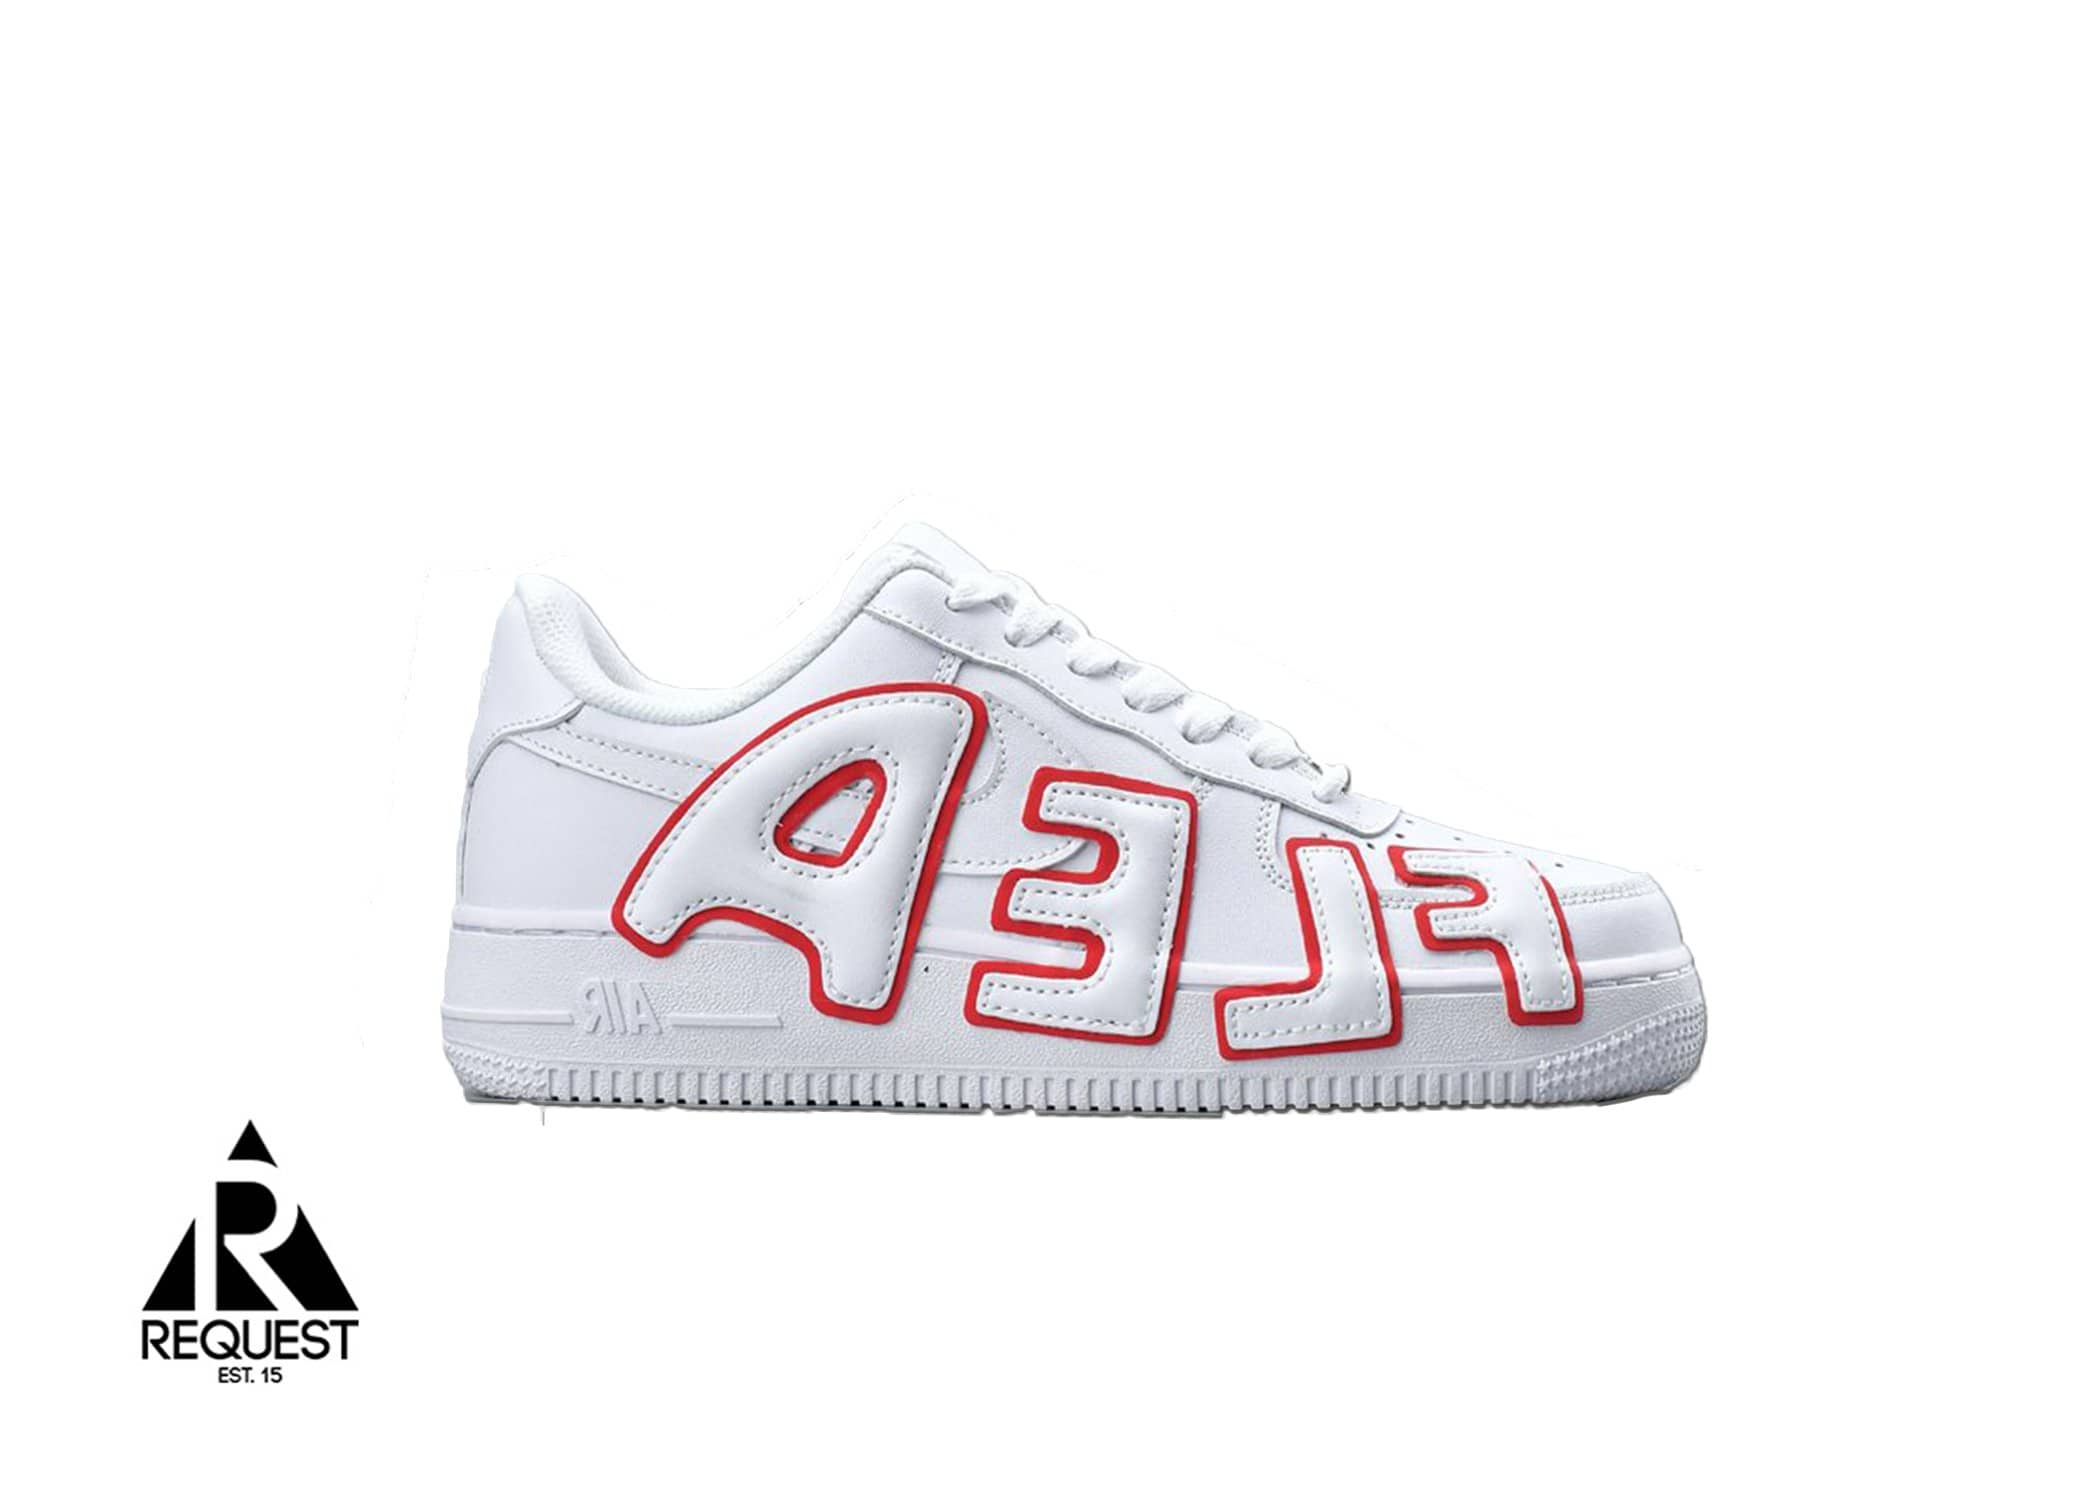 Nike Air Force 1 x CPFM “Red On White”